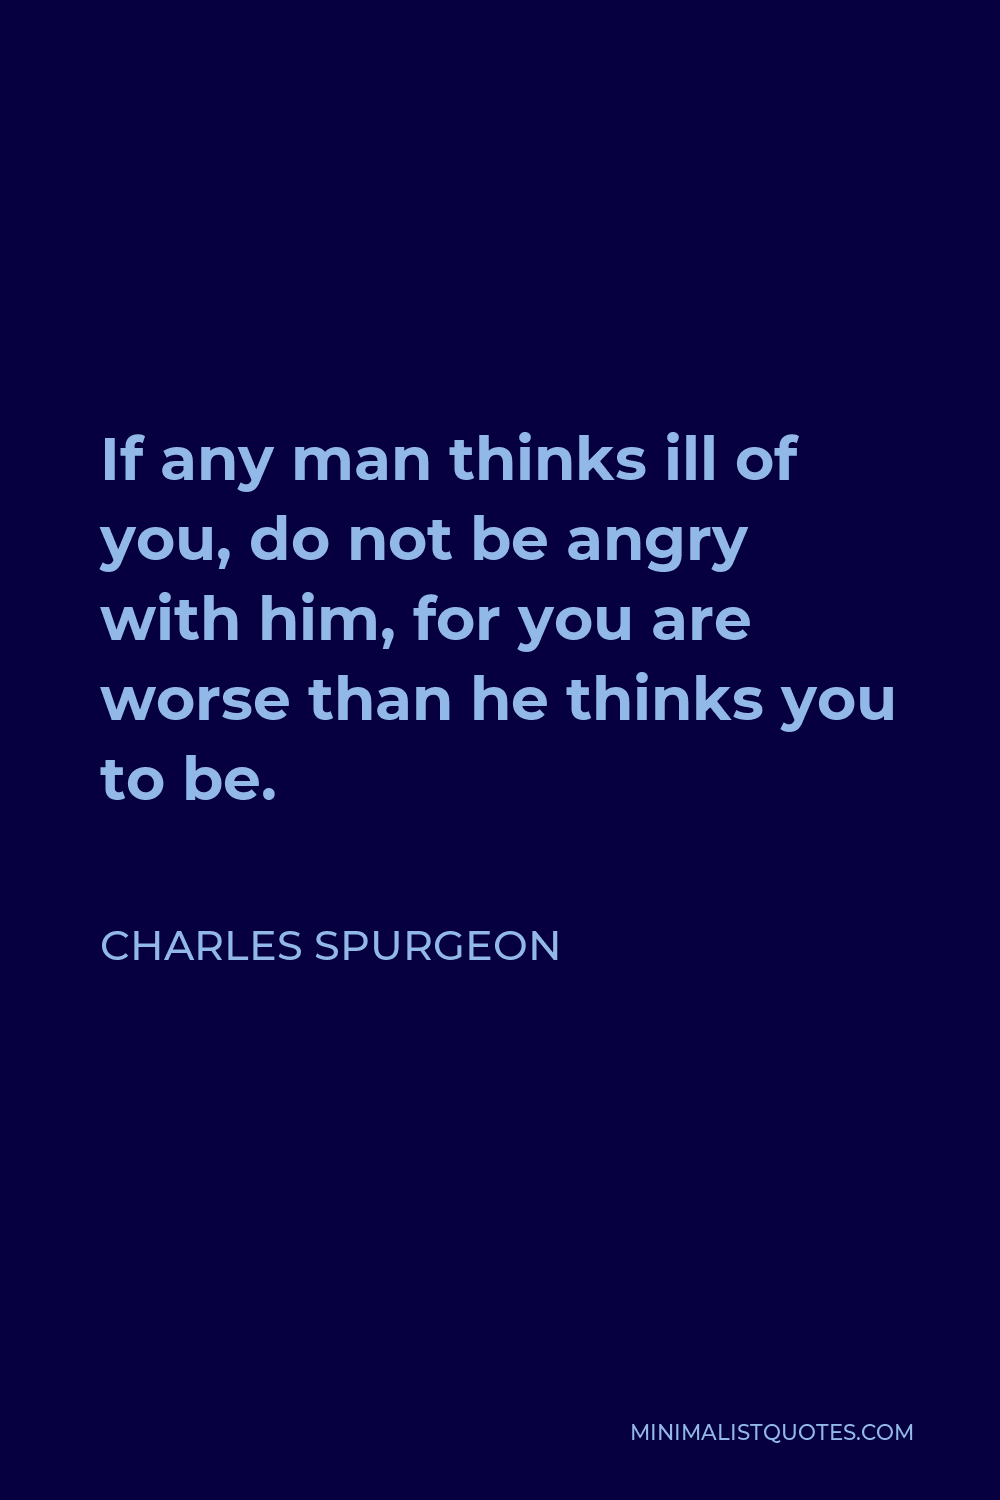 Charles Spurgeon Quote - If any man thinks ill of you, do not be angry with him, for you are worse than he thinks you to be.